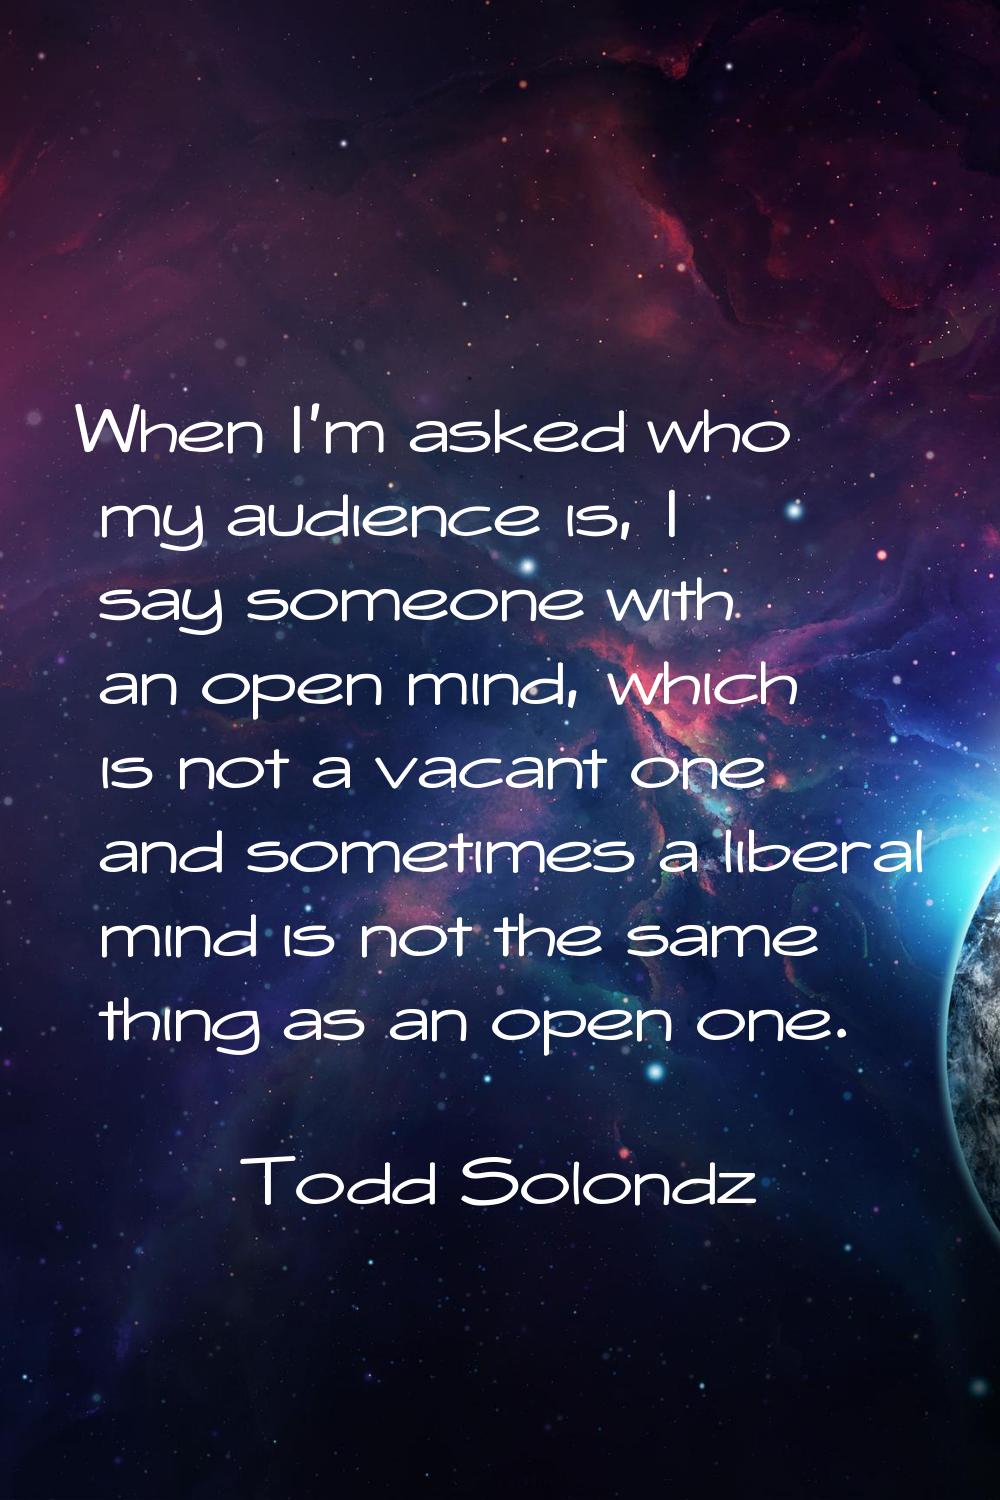 When I'm asked who my audience is, I say someone with an open mind, which is not a vacant one and s